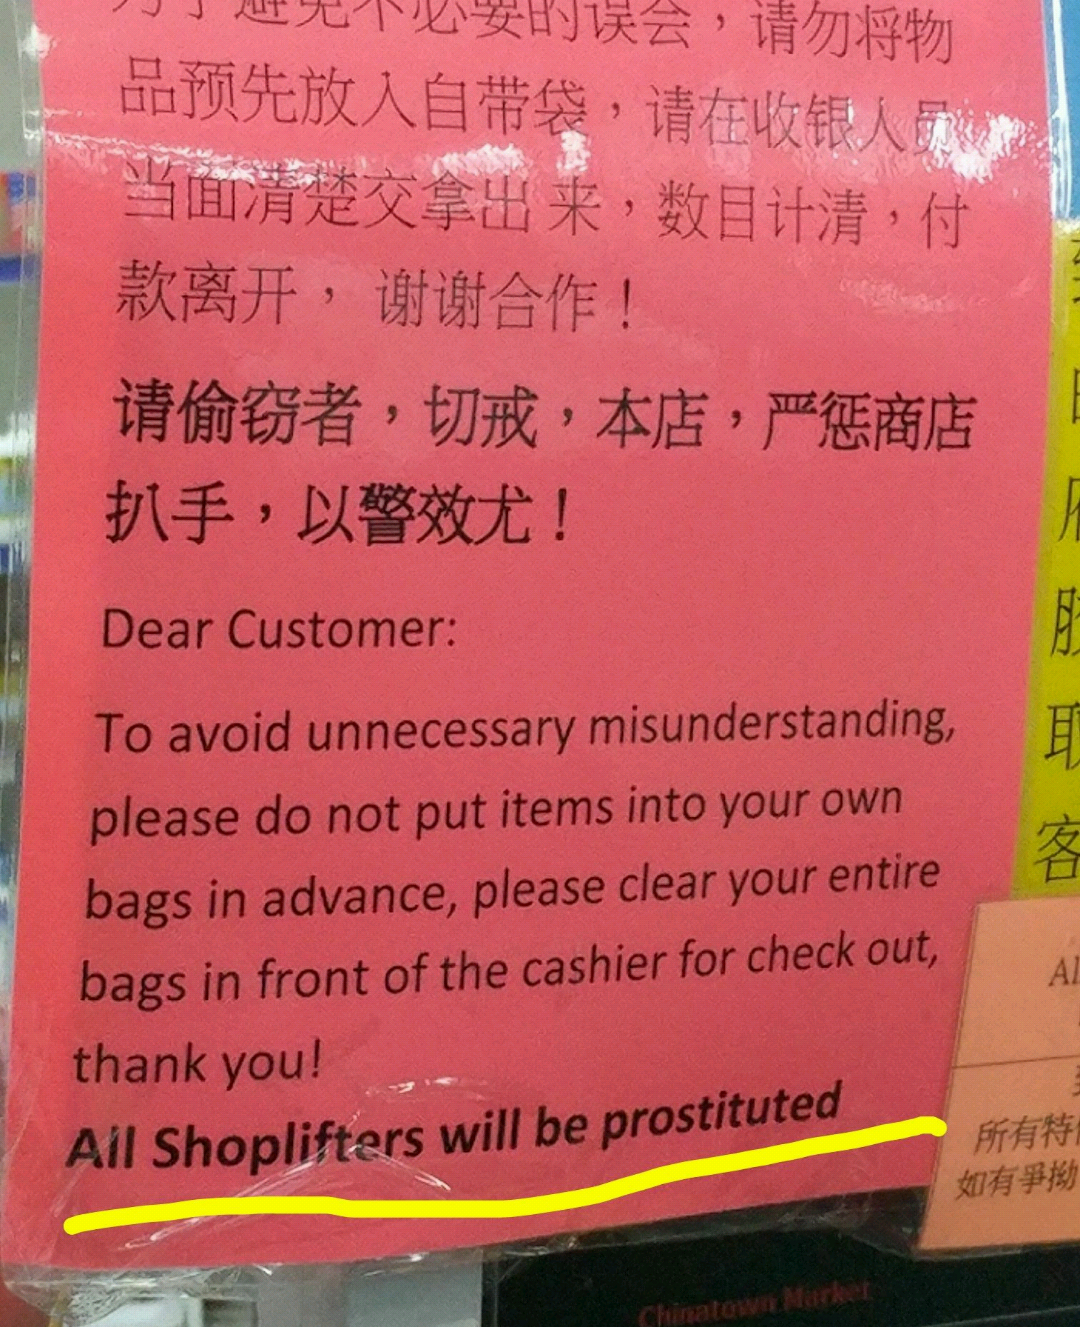 This grocery store has a serious shoplifting policy.